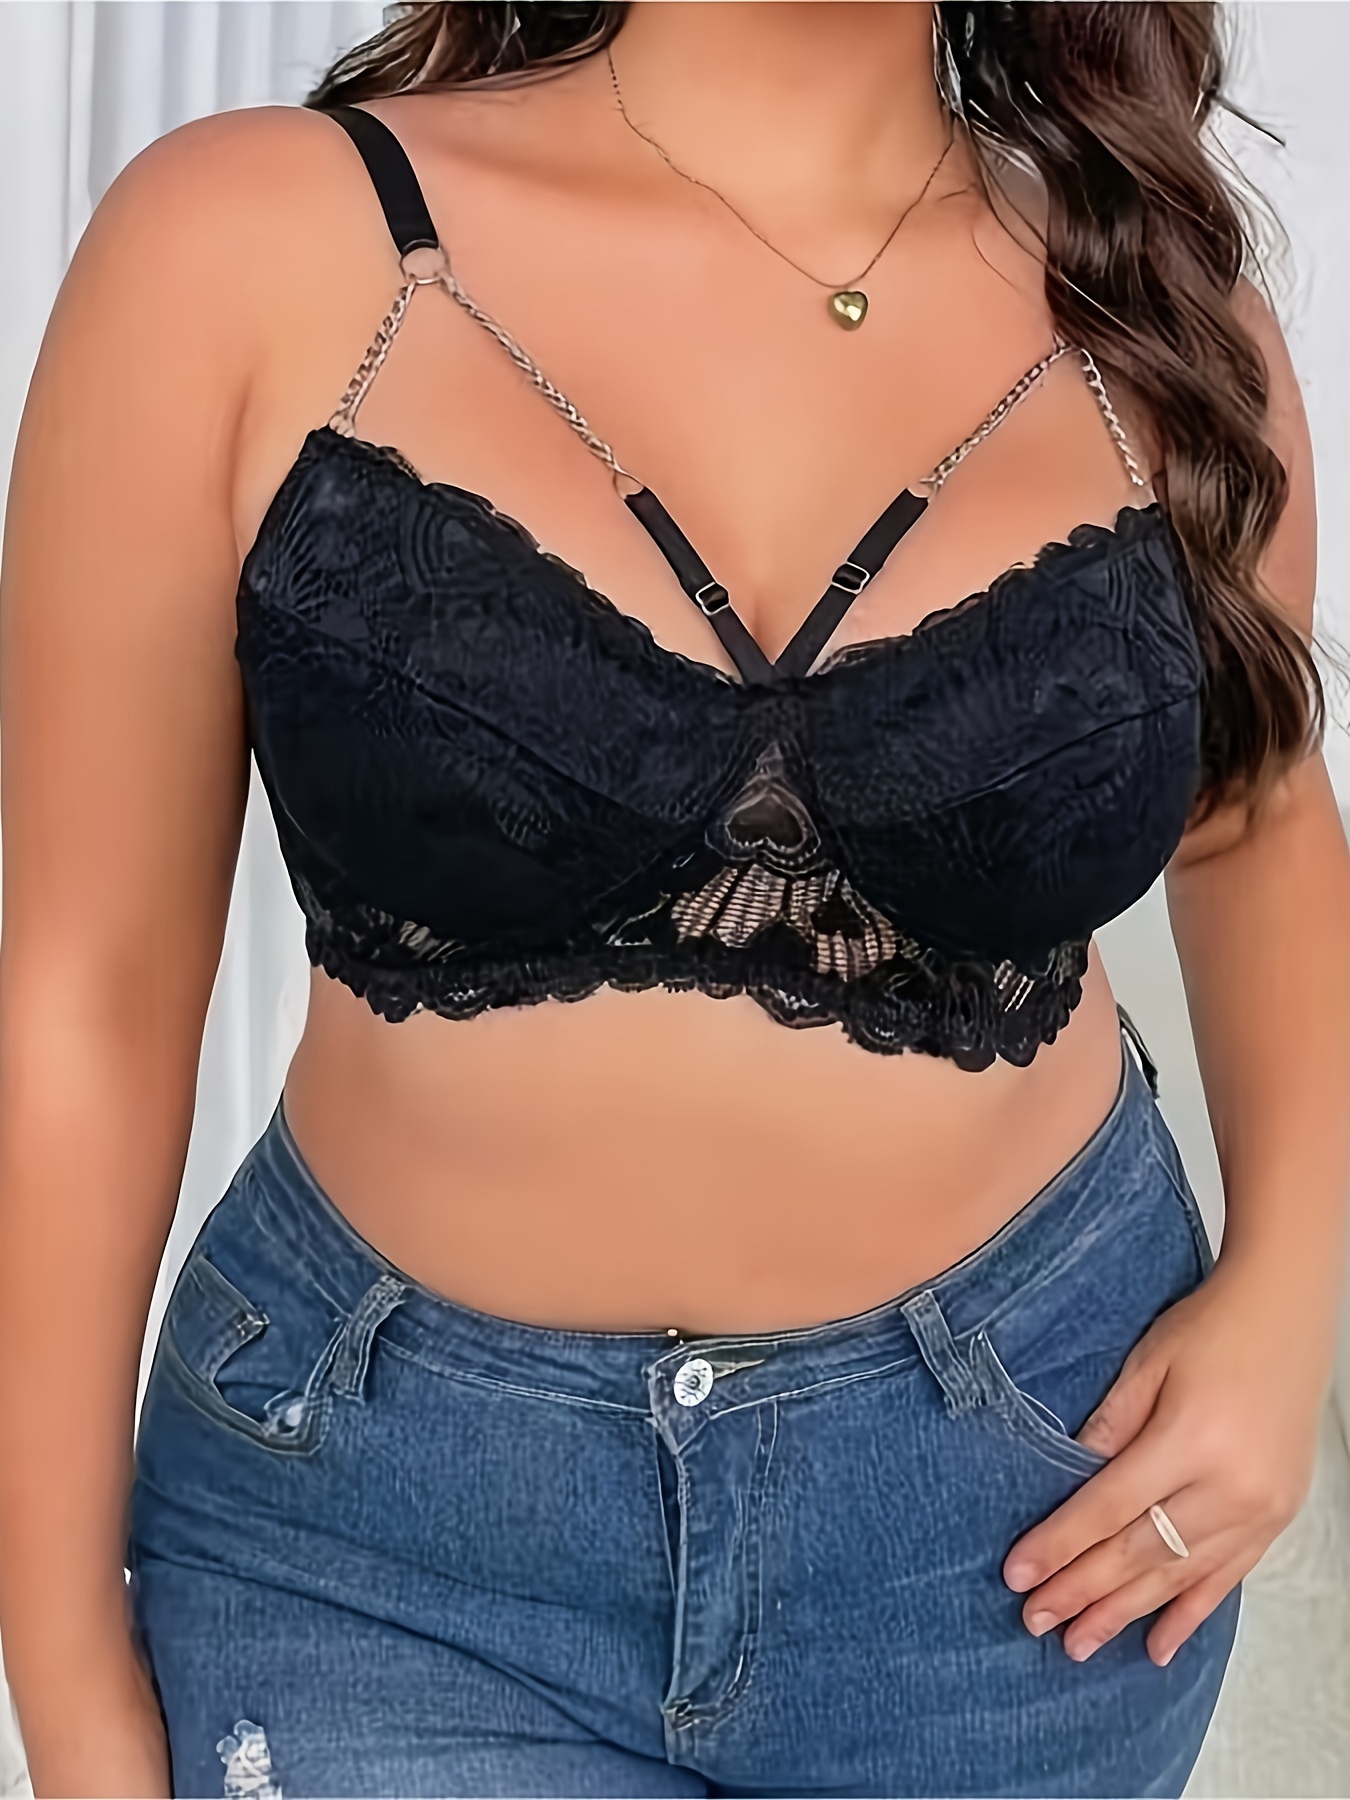 Strapless Bras For Women For Large Halter Neck Lace Hollow Out Criss Cross  Back Lace Deep V Scalloped Strappy Lette Black Sports Bra XL 